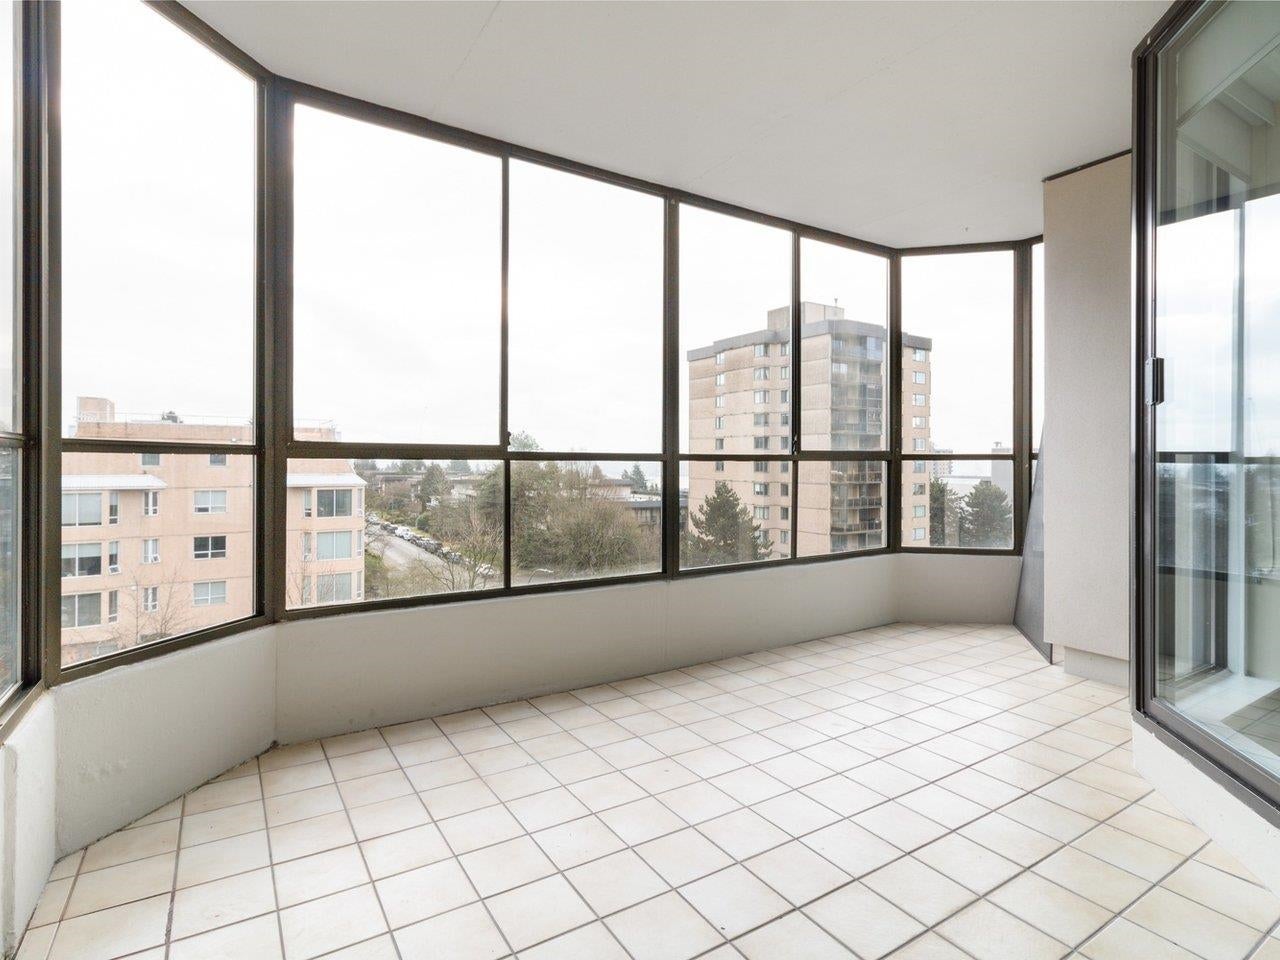 603 505 LONSDALE AVENUE - Lower Lonsdale Apartment/Condo for sale, 2 Bedrooms (R2760507) #11